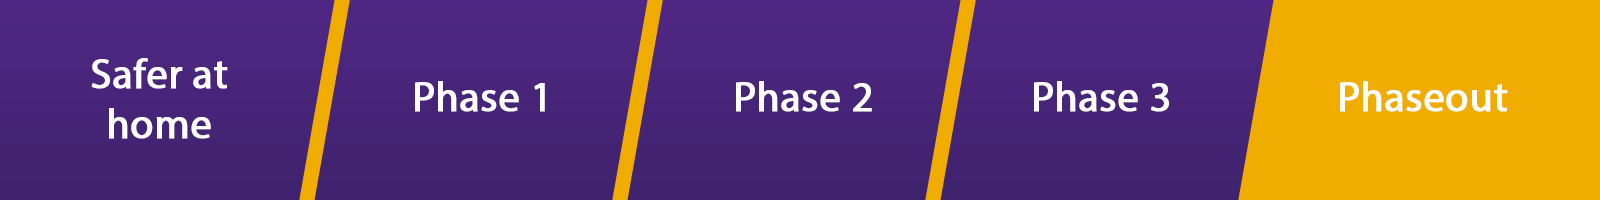 Phaseout graphic